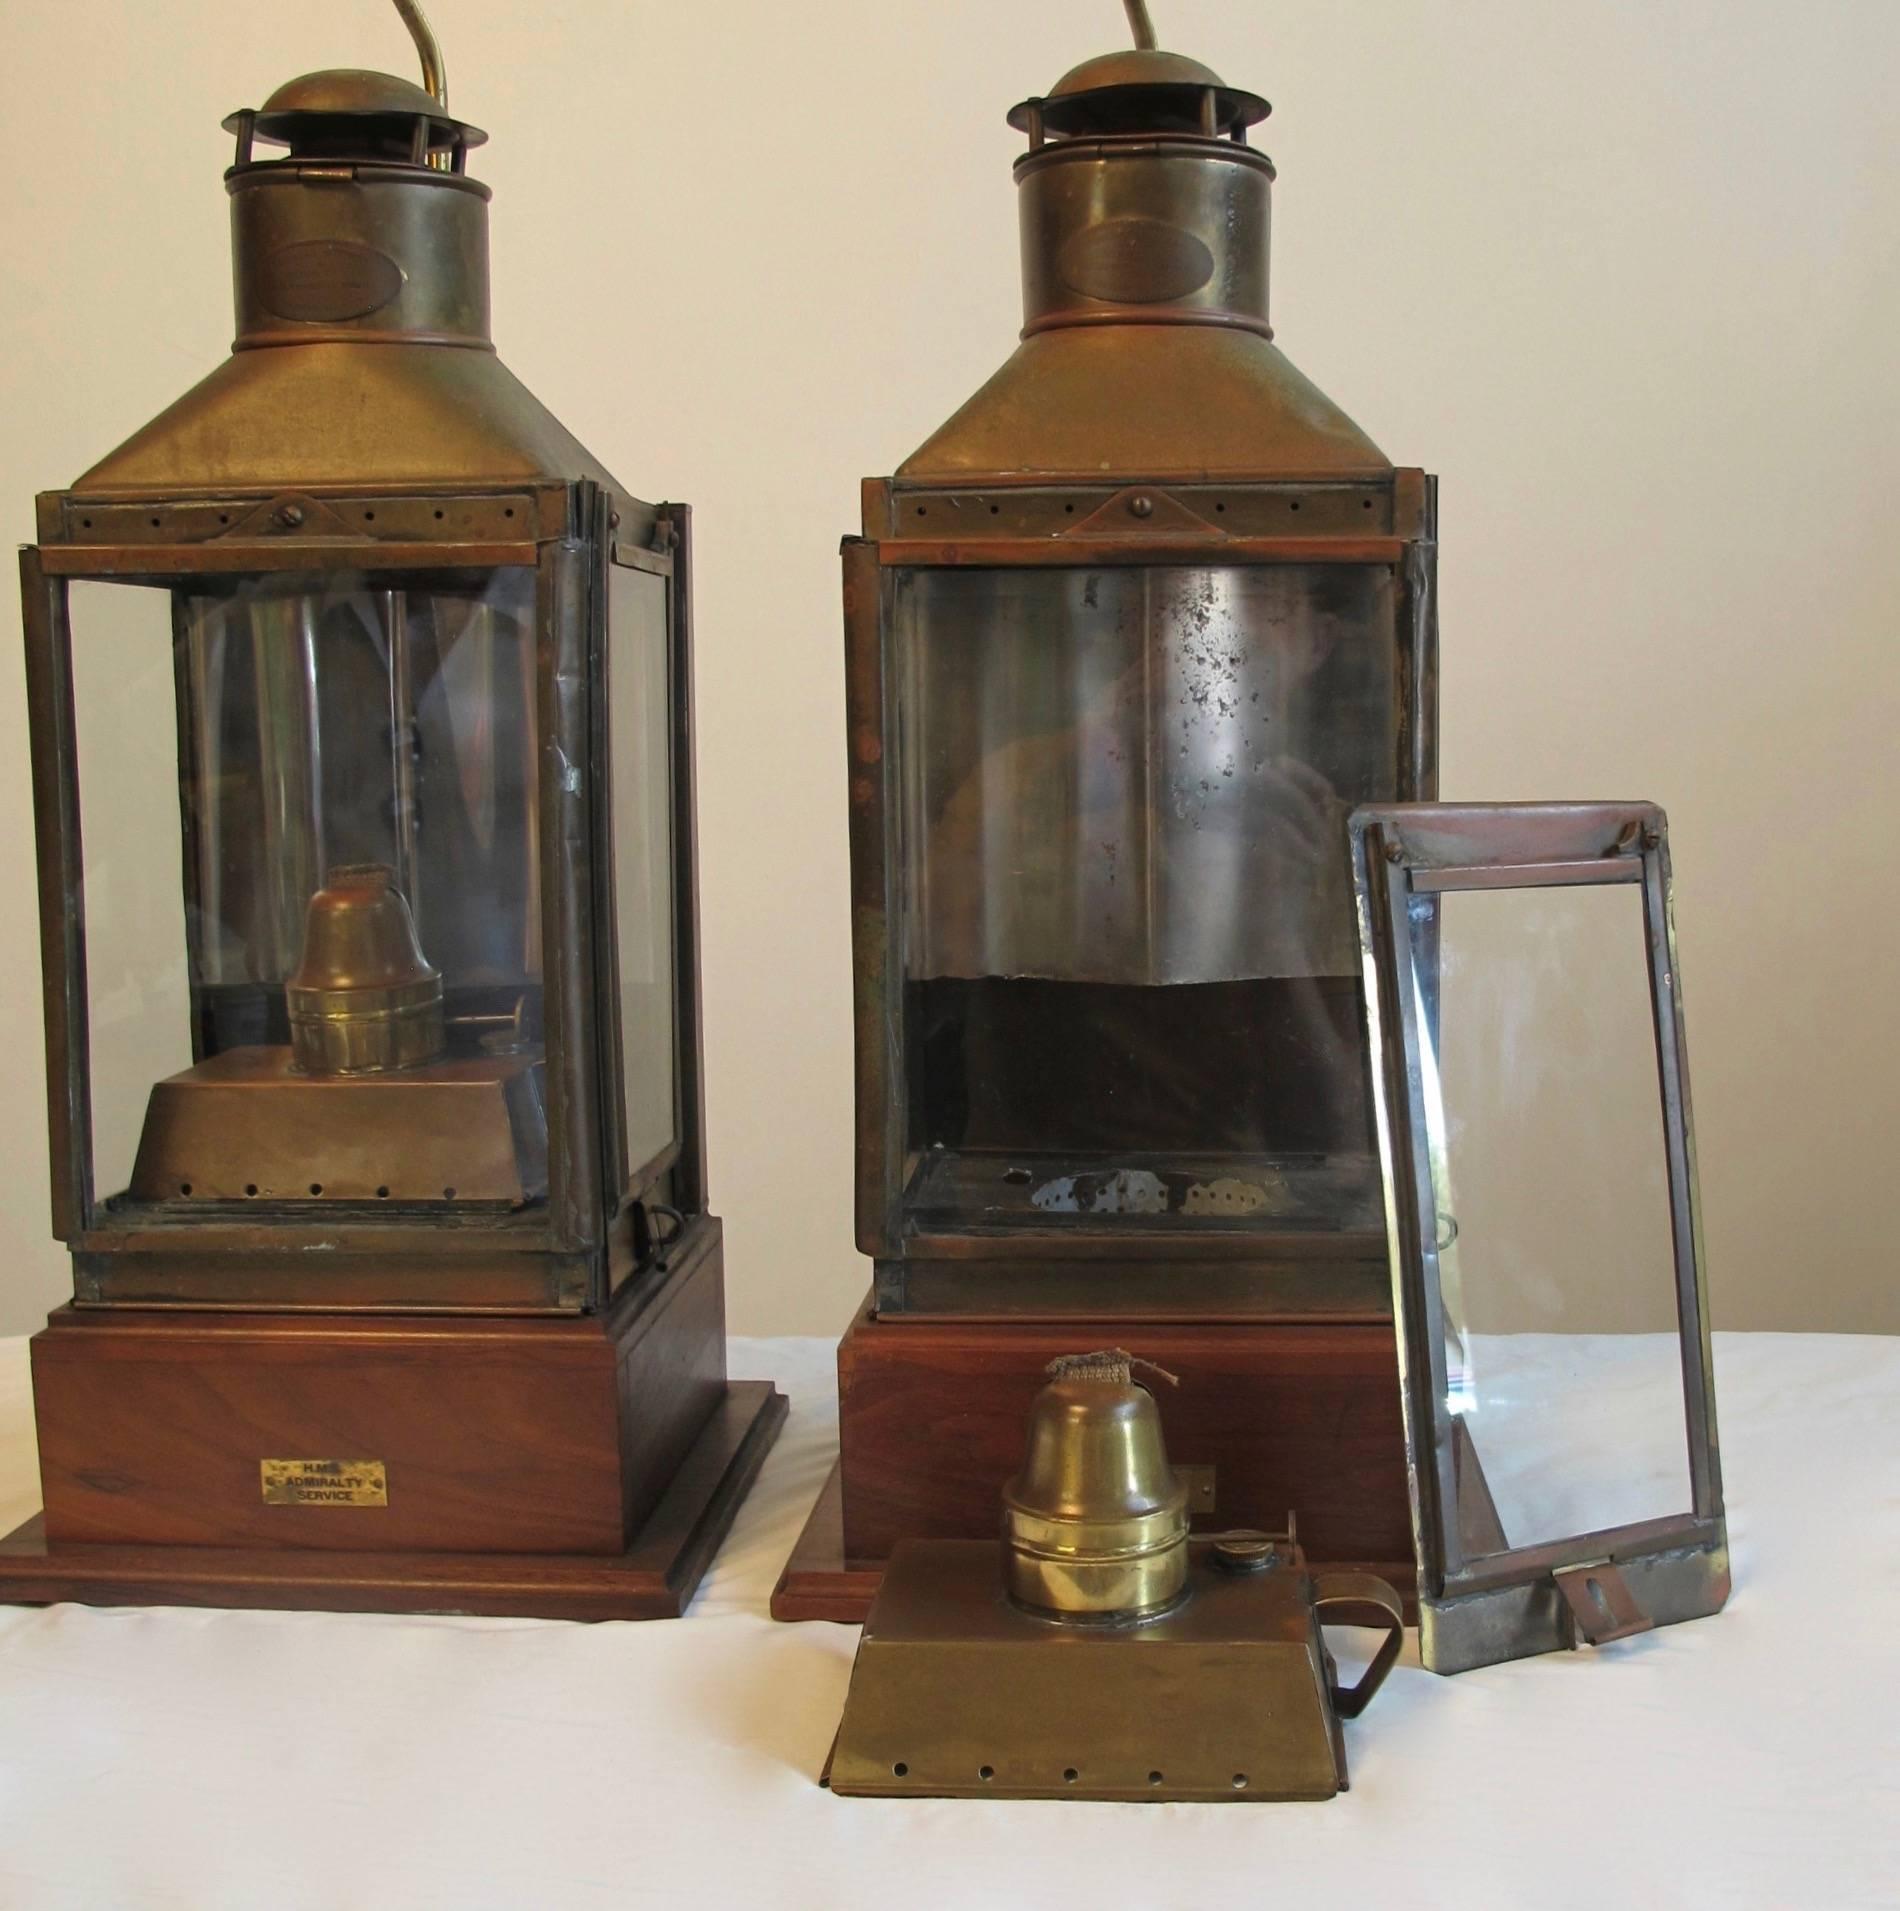 A pair of antique museum mounted ship lanterns intact and completely original from H.M.S. Admiralty Service. Oval plaque on the chimney reads 